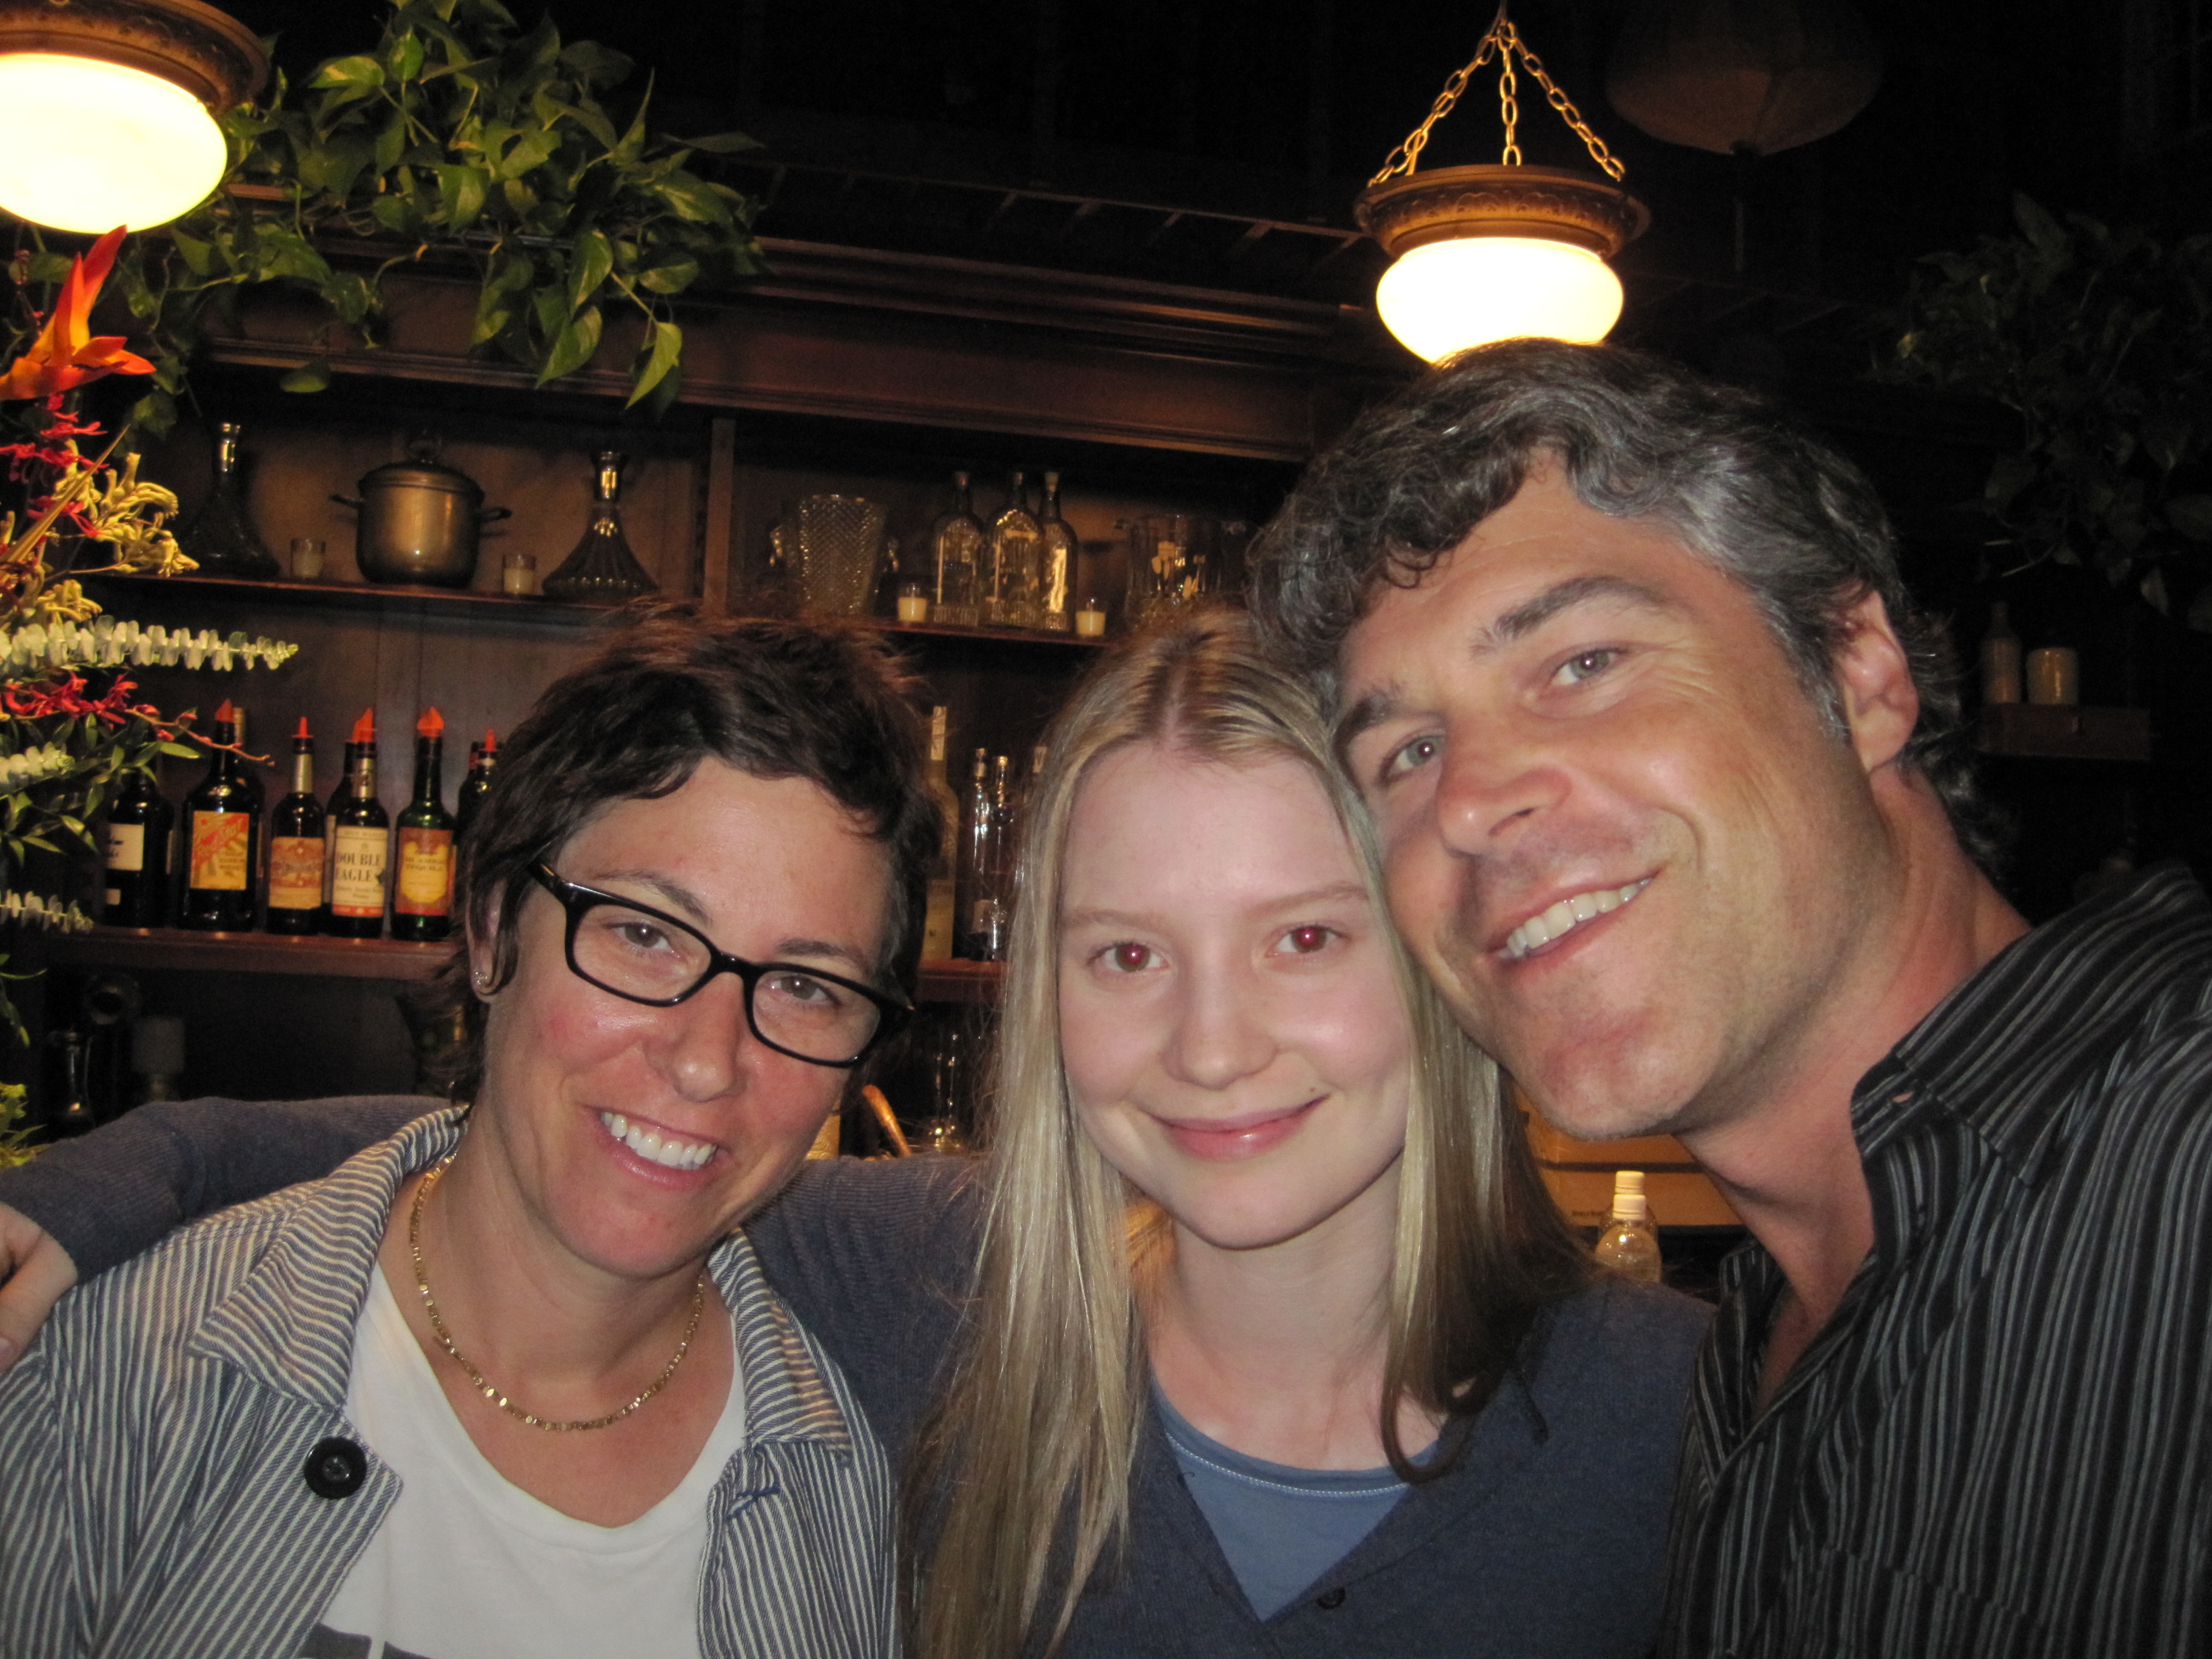 Director Lisa Cholodenko, Actress Mia Wasikowska and Producer Todd Labarowski on the set on 'The Kids Are All Right' on July 30, 2009.